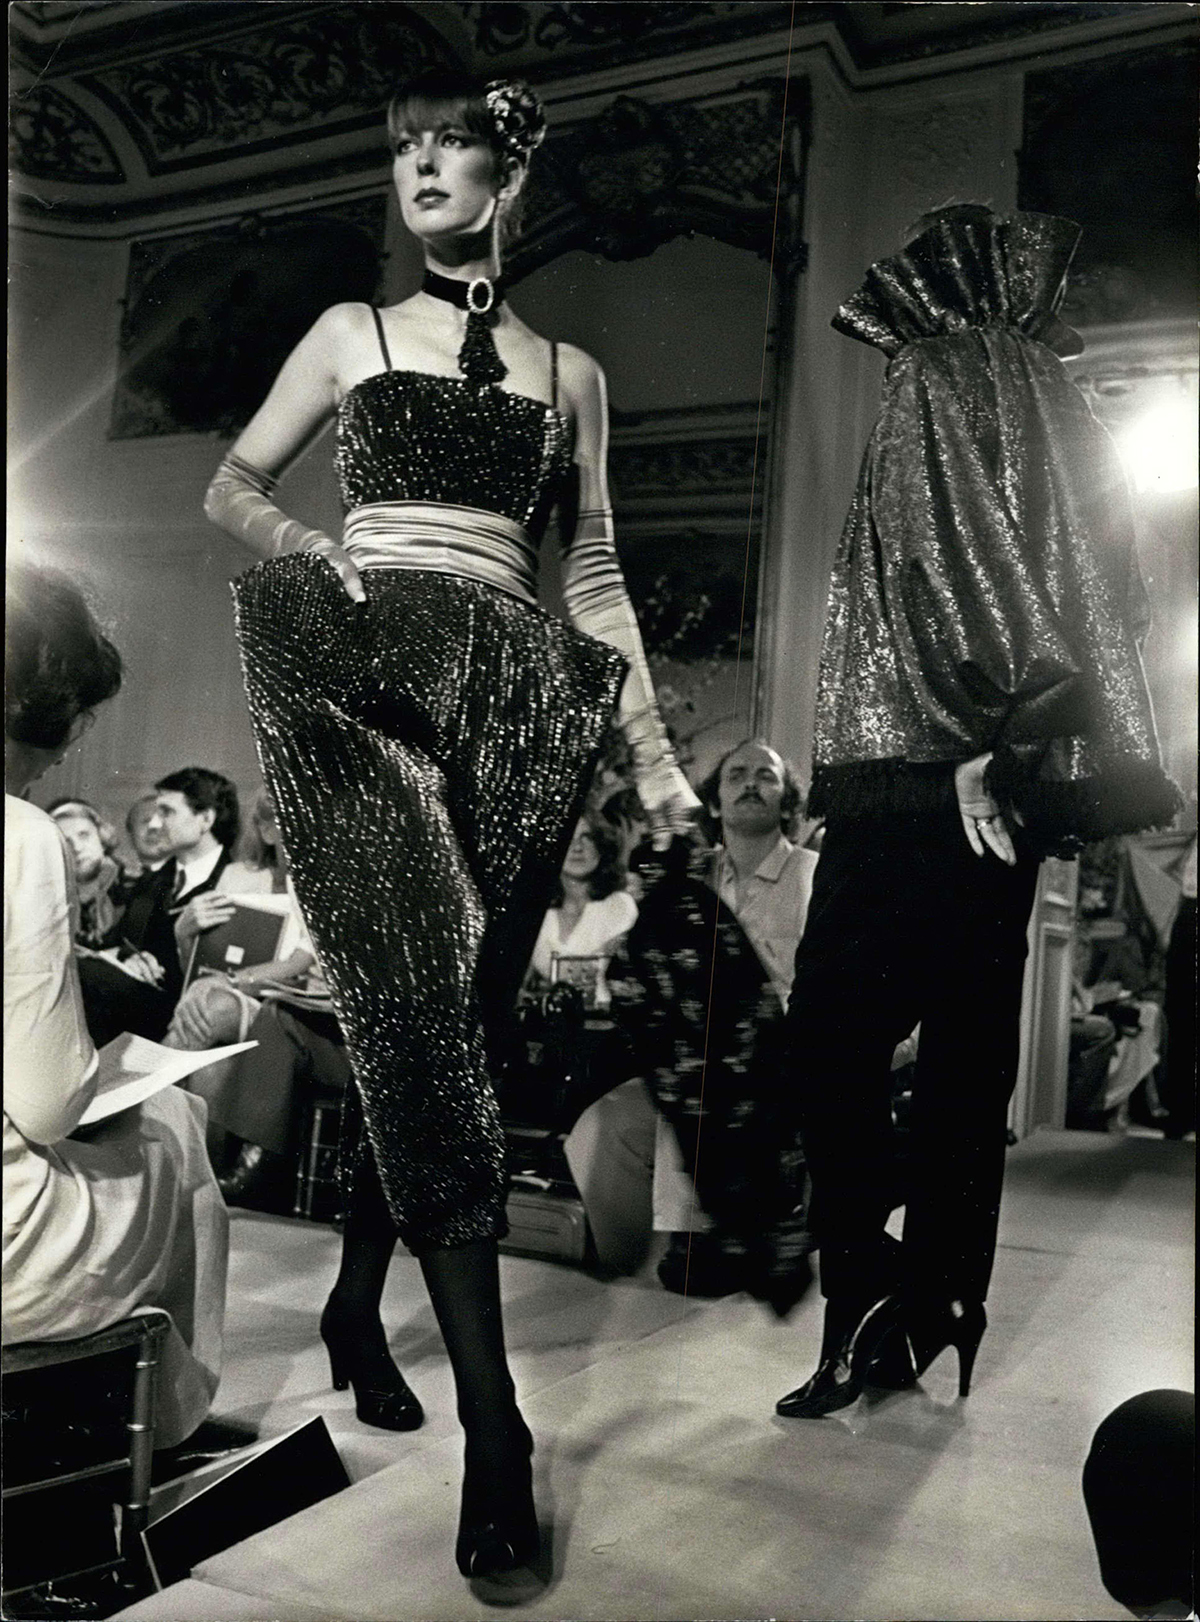 A black and white photo of a model on a catwalk wearing a black vest and large angled trousers